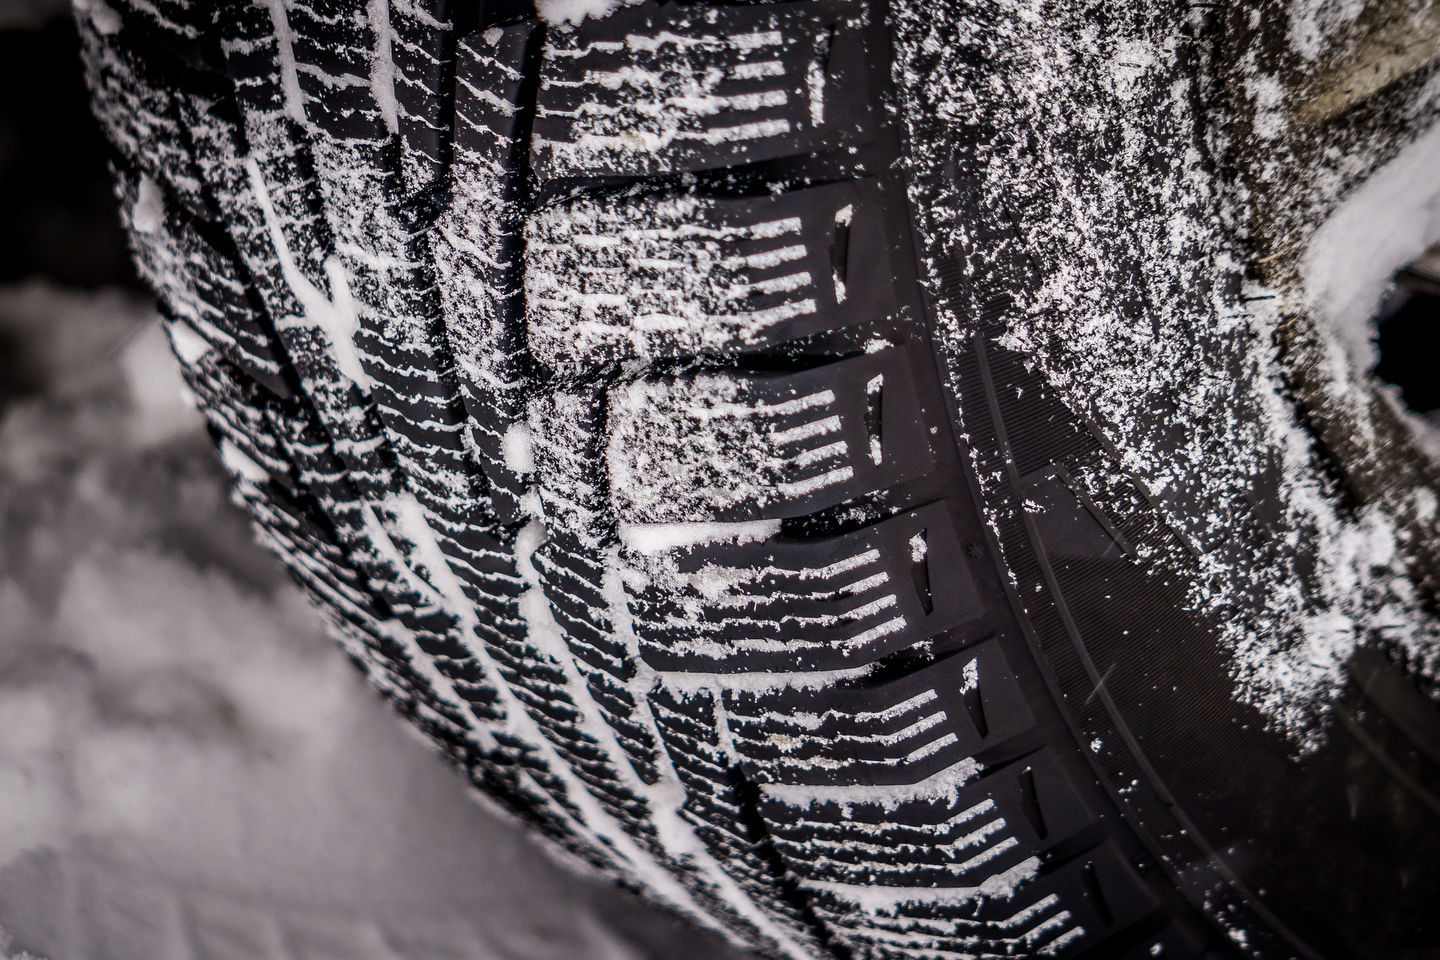 Honda Winter Tires: How to tell if your winters are still in good condition